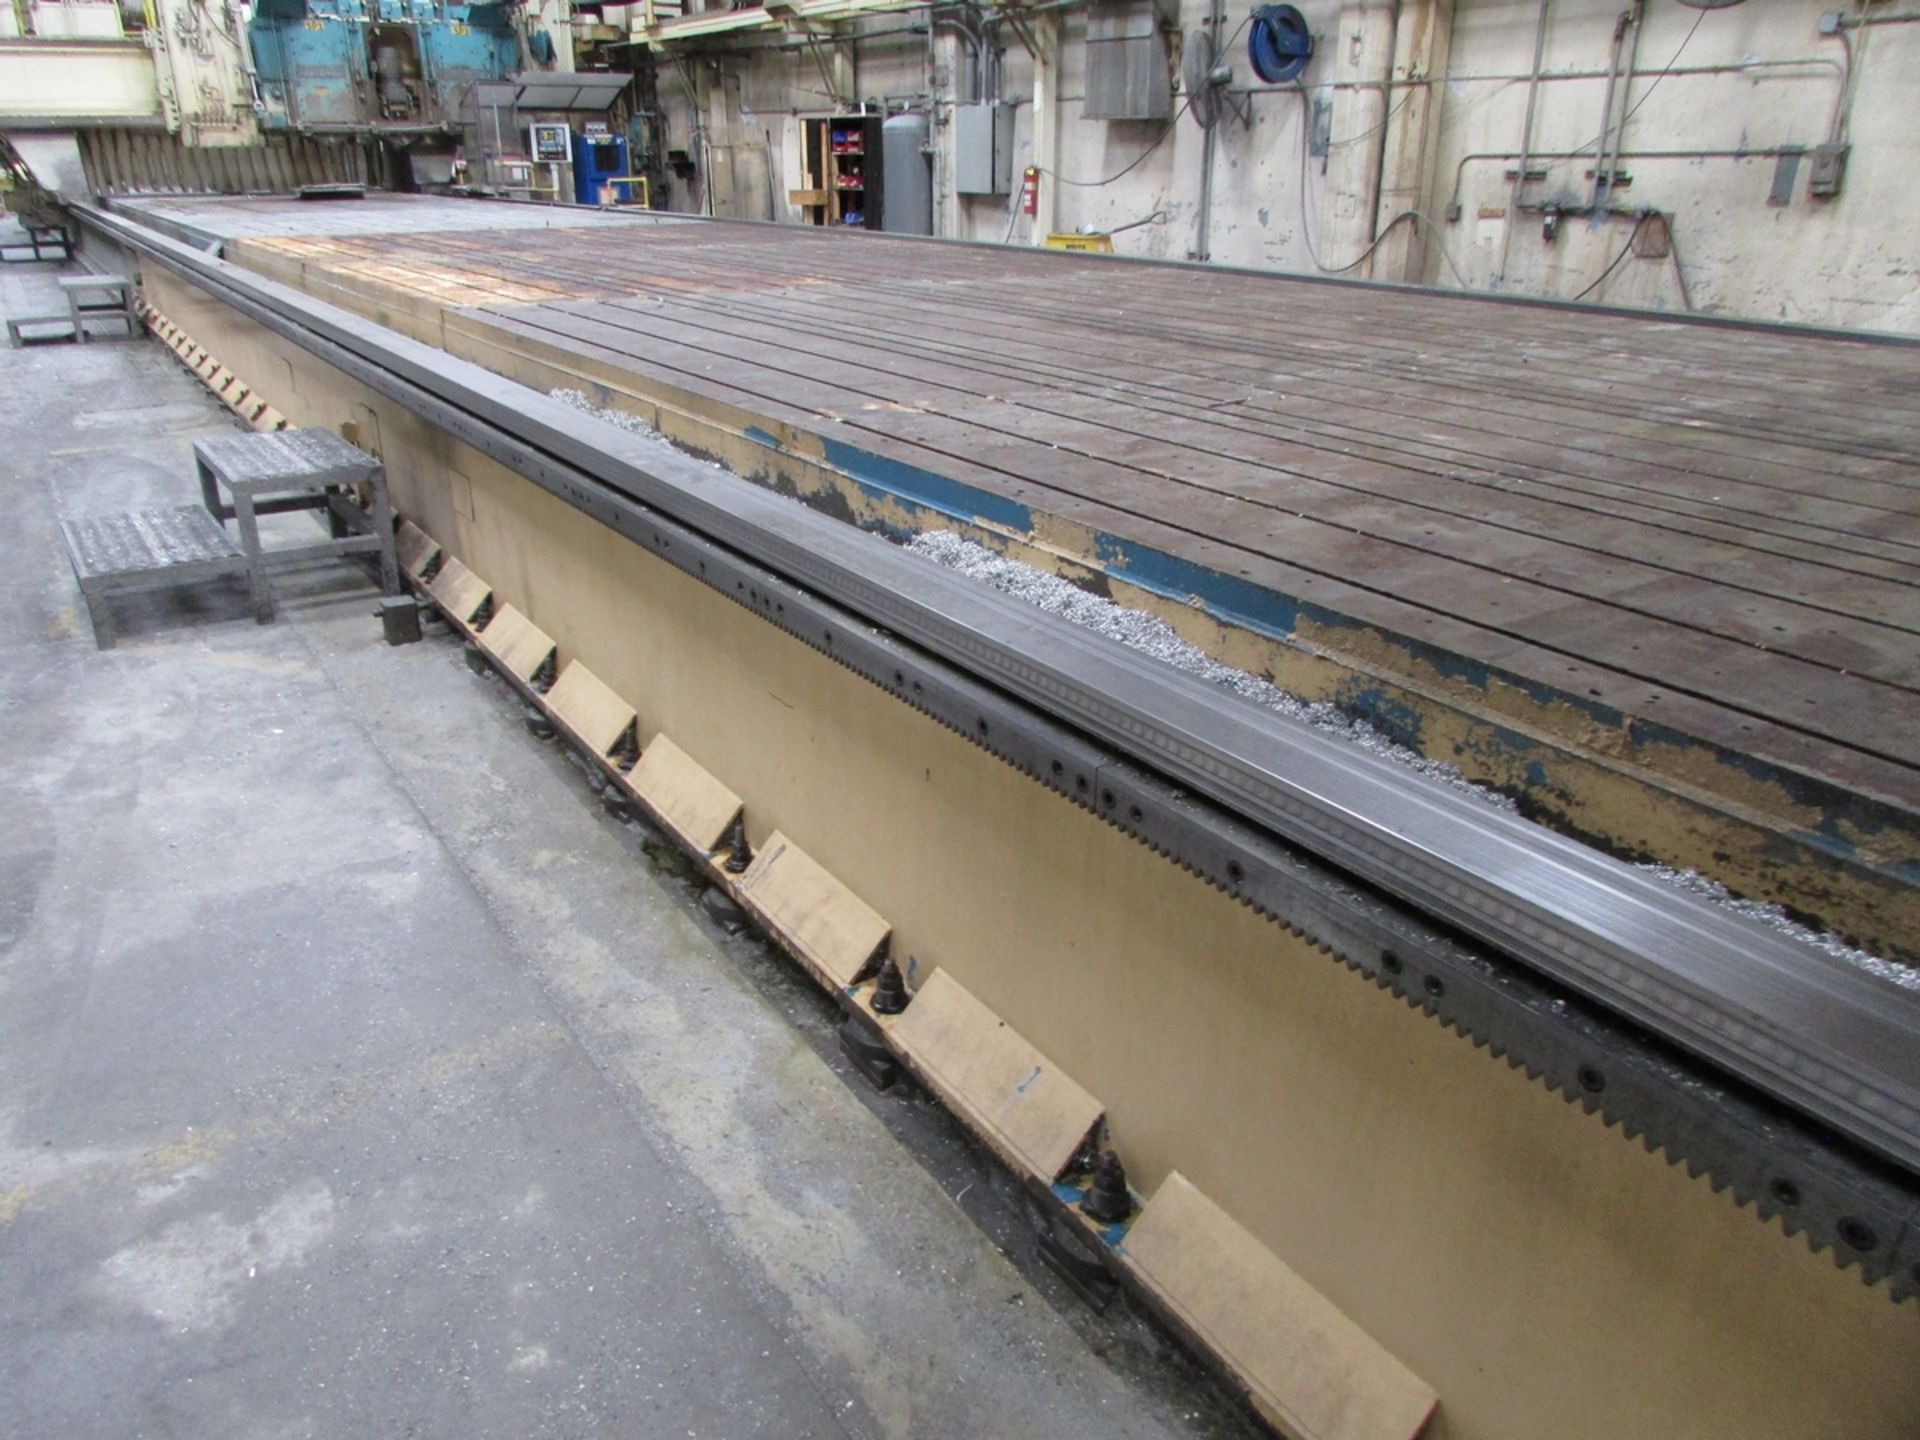 T-SLOTTED GANTRY MILL TABLE, 120' X 160", 125' BEDWAY LENGTH - Image 2 of 18